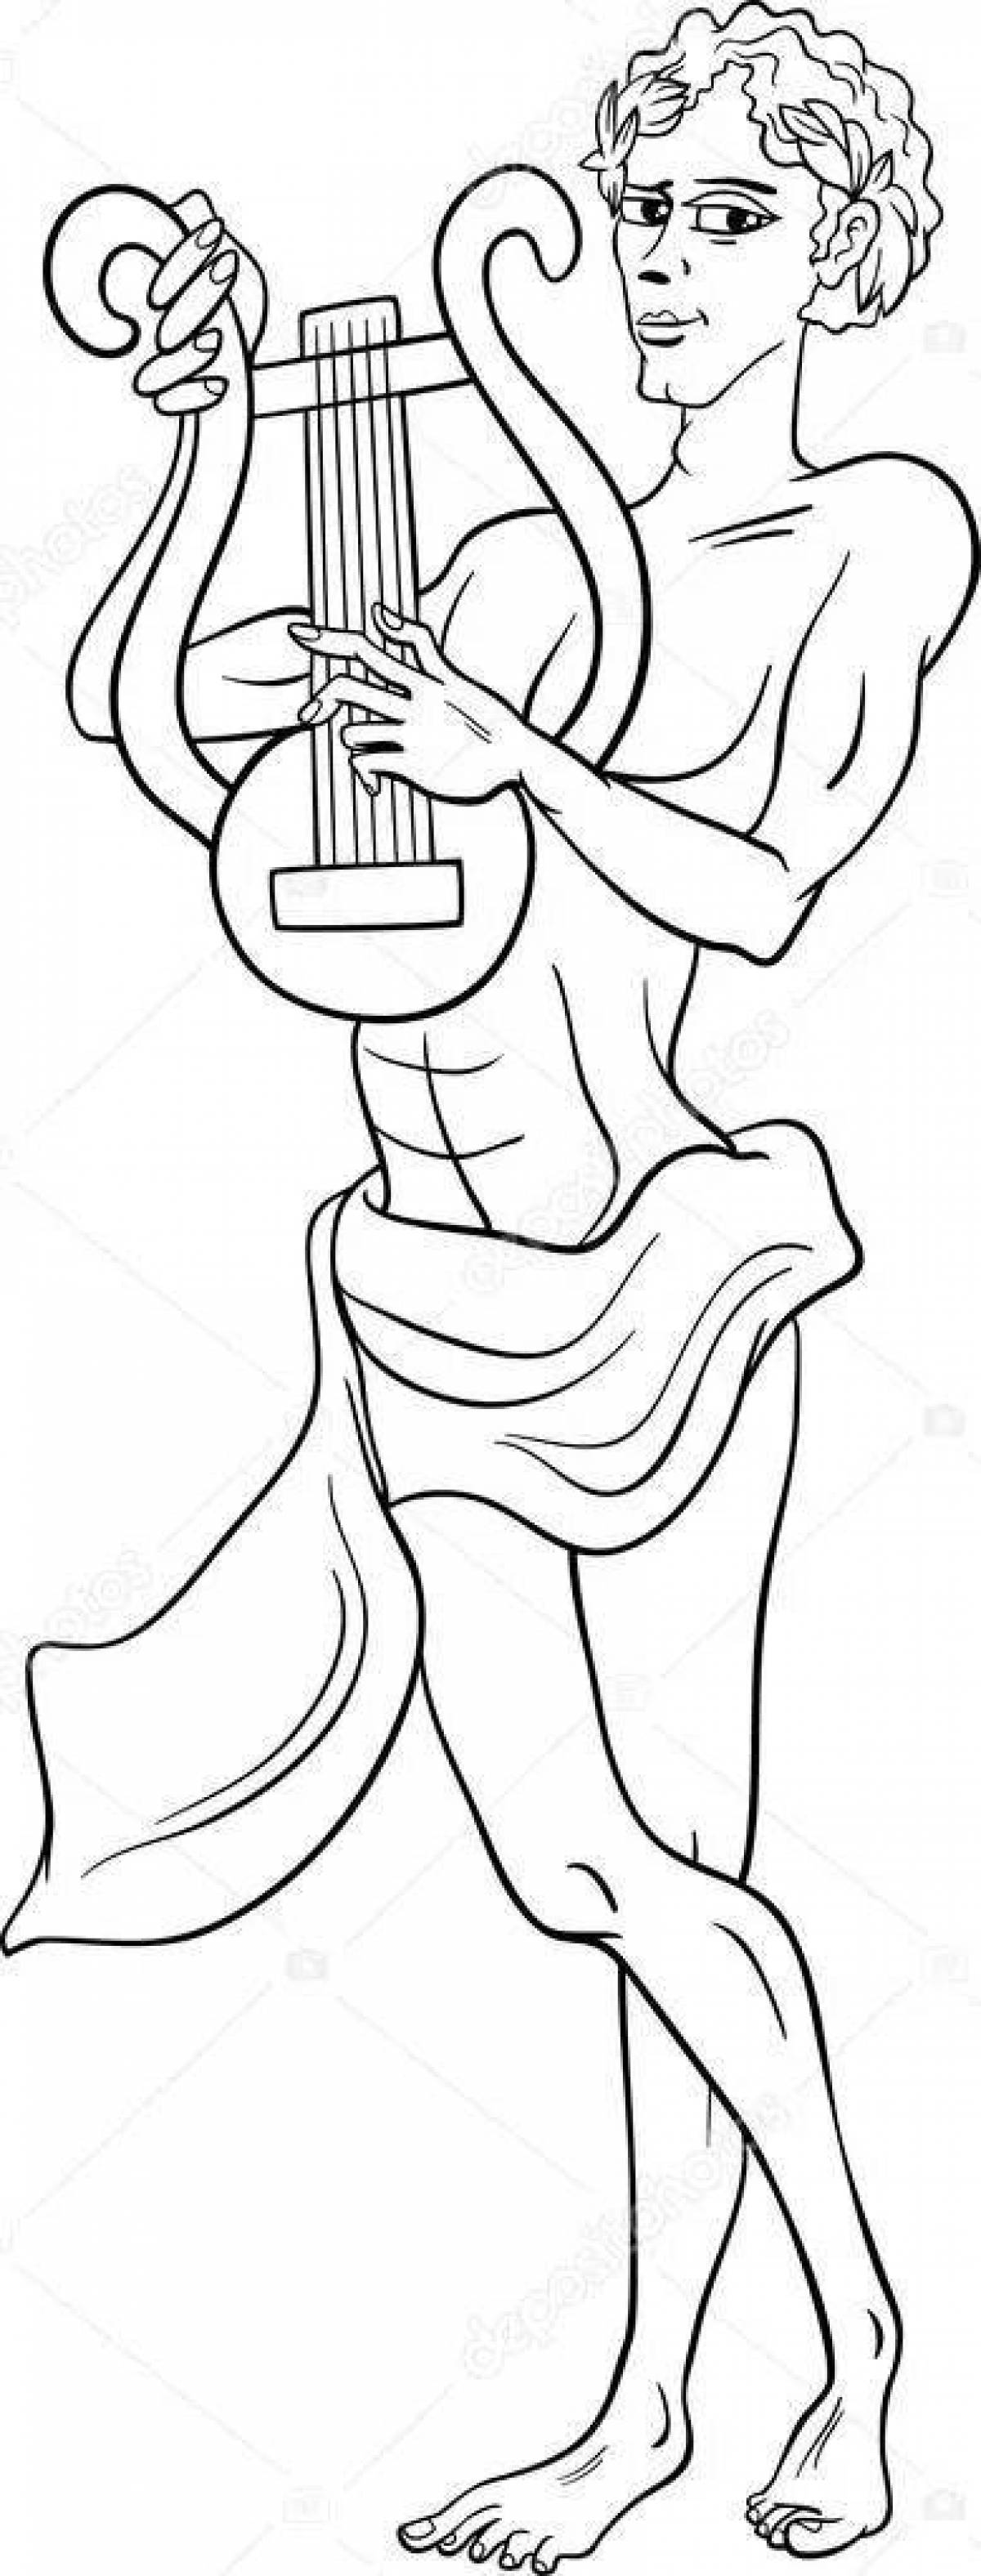 Apollo playful coloring page